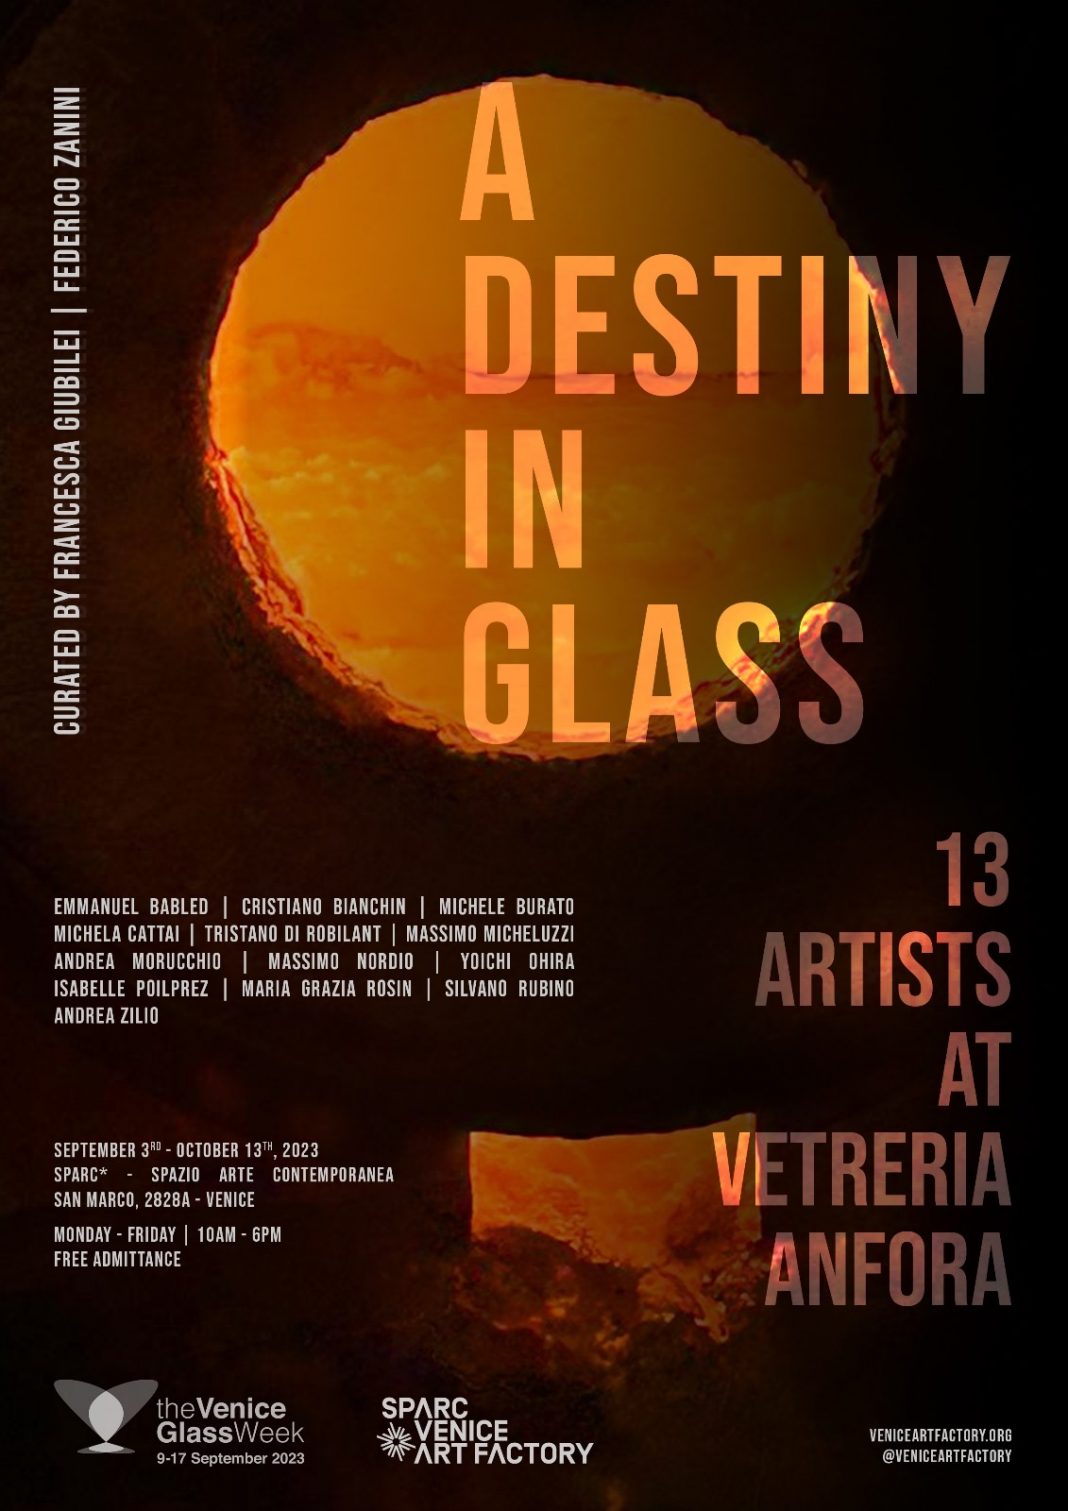 A Destiny in Glass. 13 Artists at Vetreria Anforahttps://www.exibart.com/repository/media/formidable/11/img/6af/IMG_1239-1068x1511.jpeg